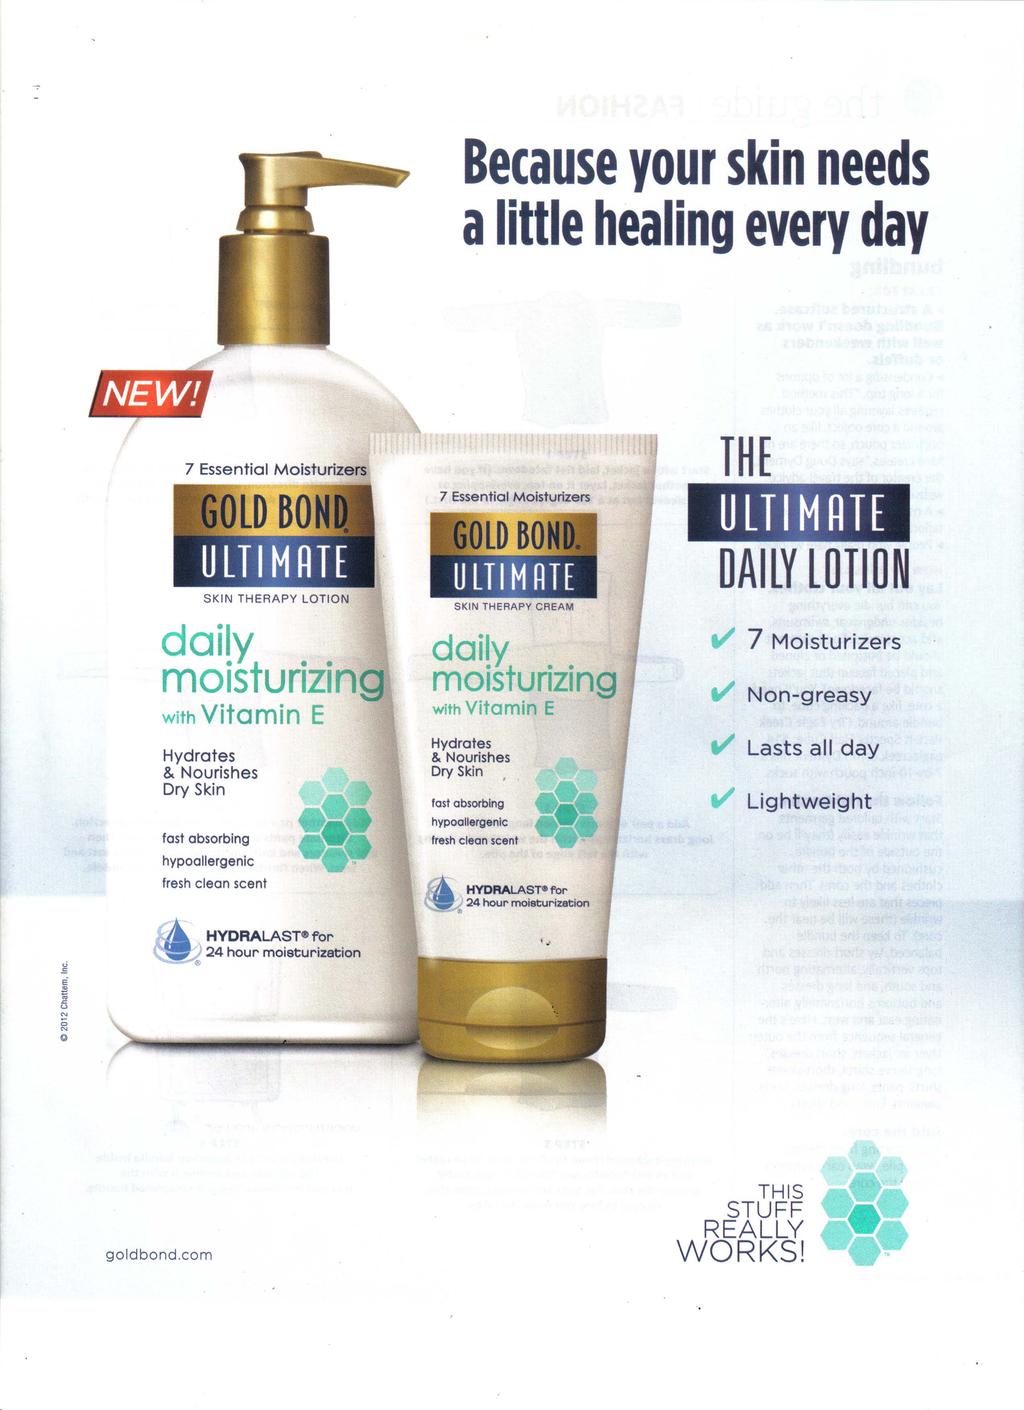 Because your skin needs a little healing every day 7 Essential Moisturizers daily moisturizing with Vitamin E Hydrates & Nourishes Dry Skin fast absorbing hypoallergenic fresh clean scent HYDRALASTe